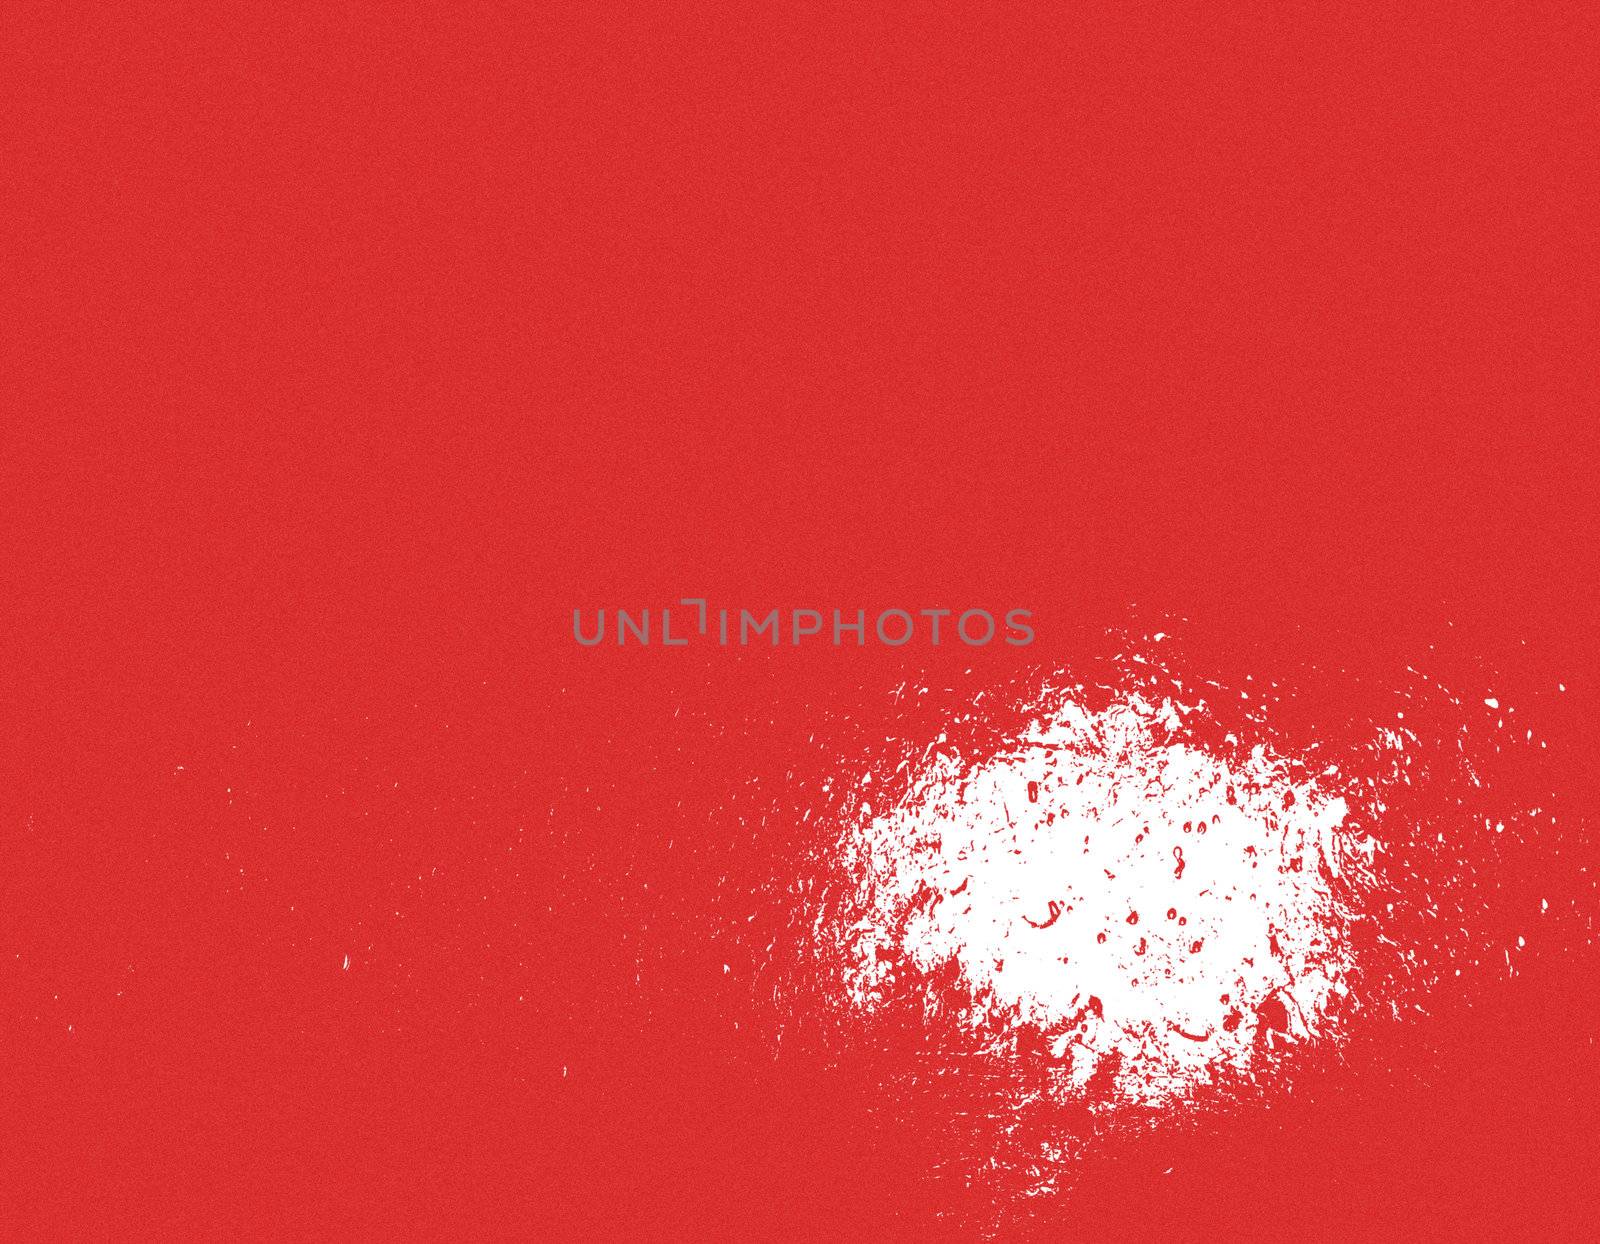 image of the red background with white spot